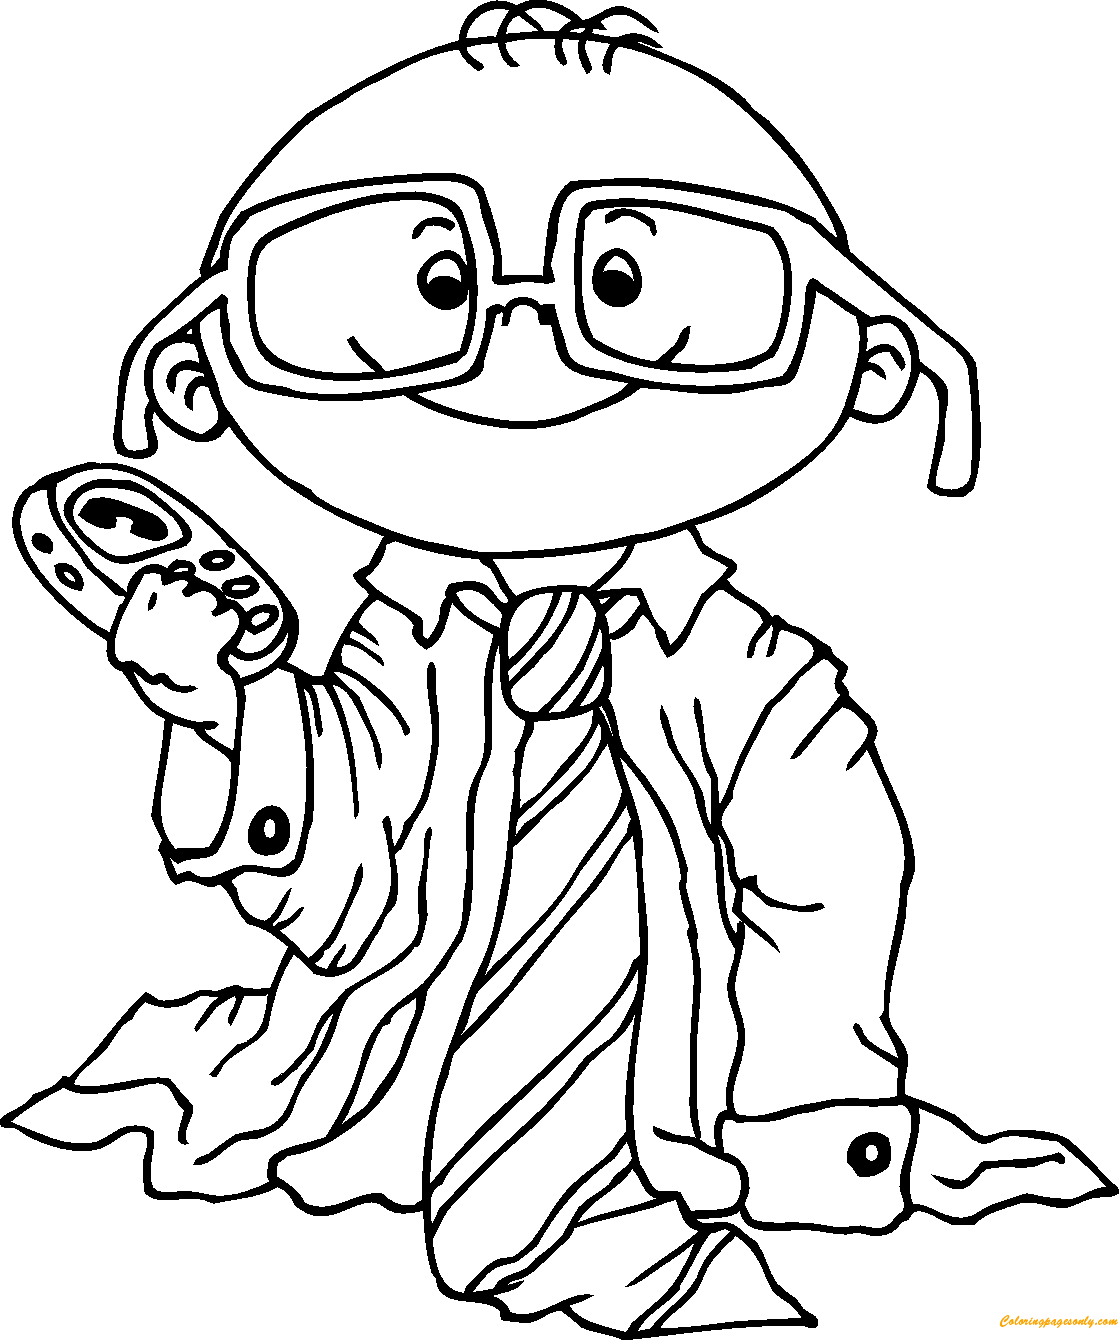 Funny Little Boy Coloring Pages   Funny Coloring Pages   Coloring ...